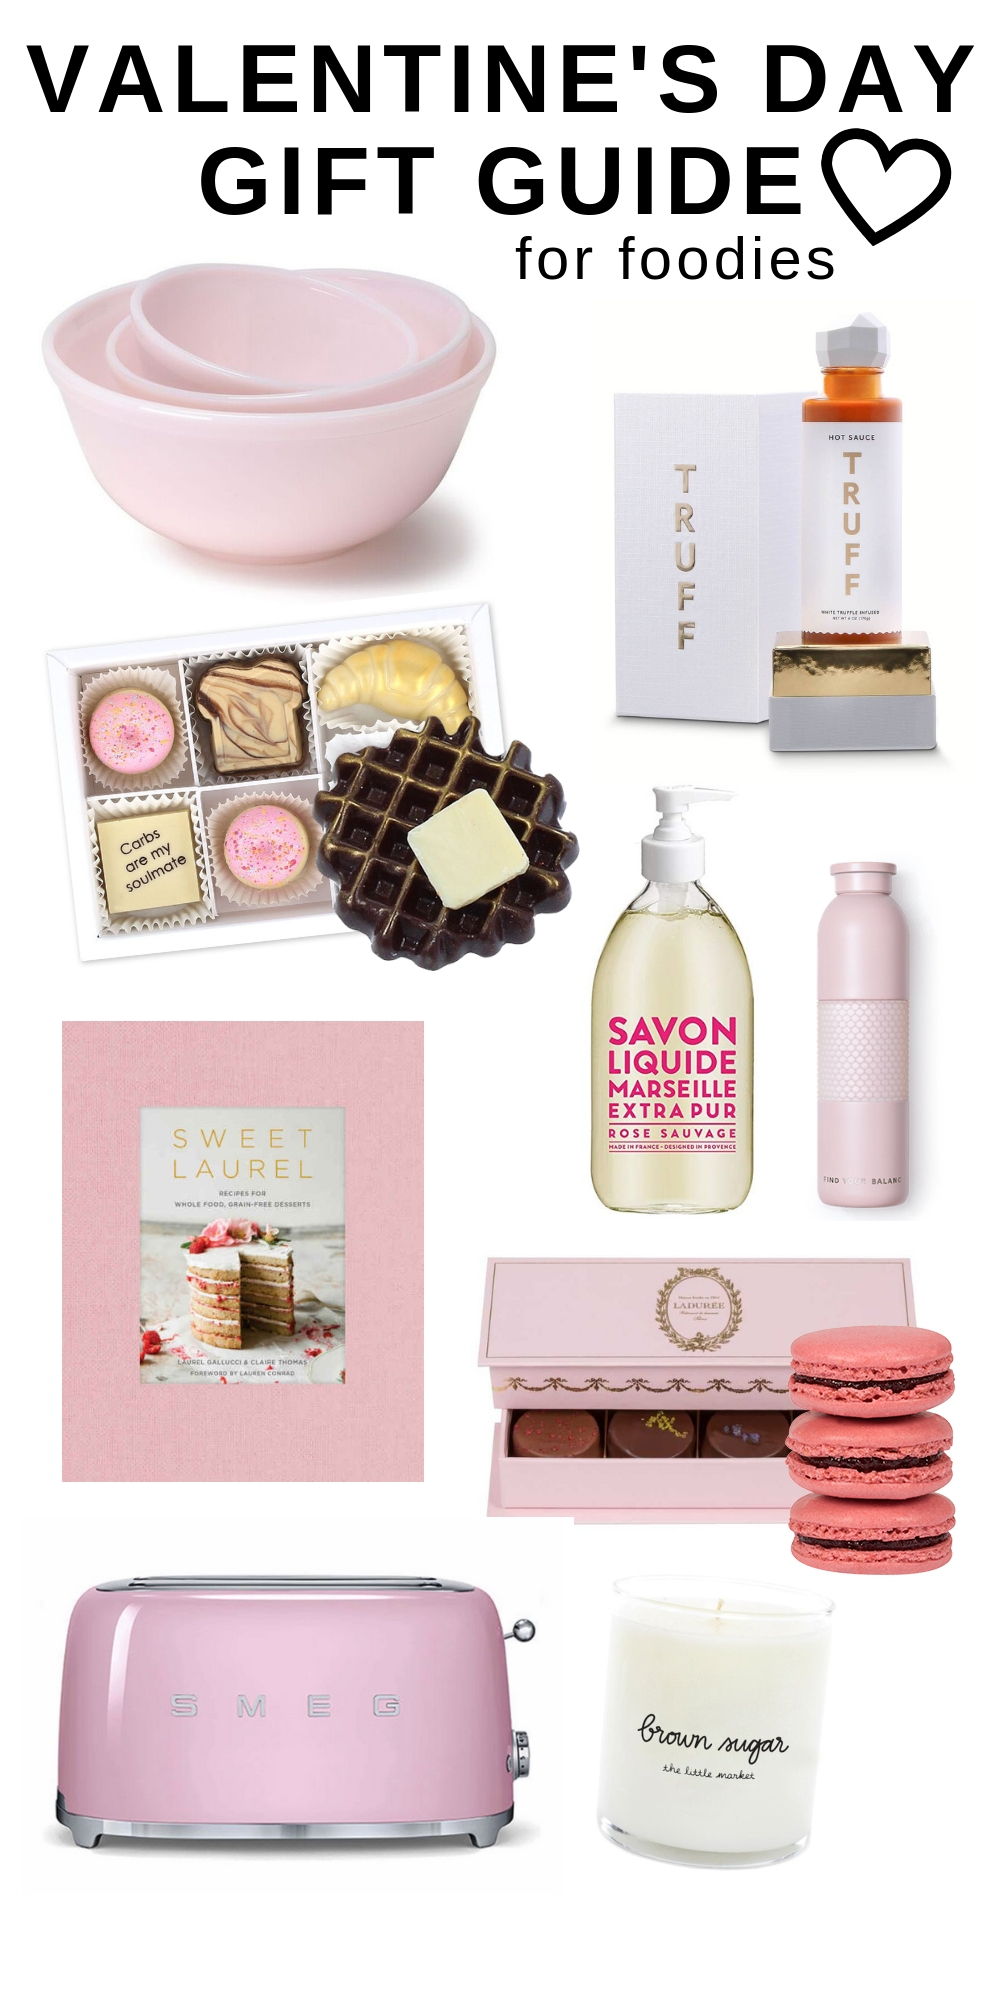 Valentine's Day Gift Ideas For Foodies